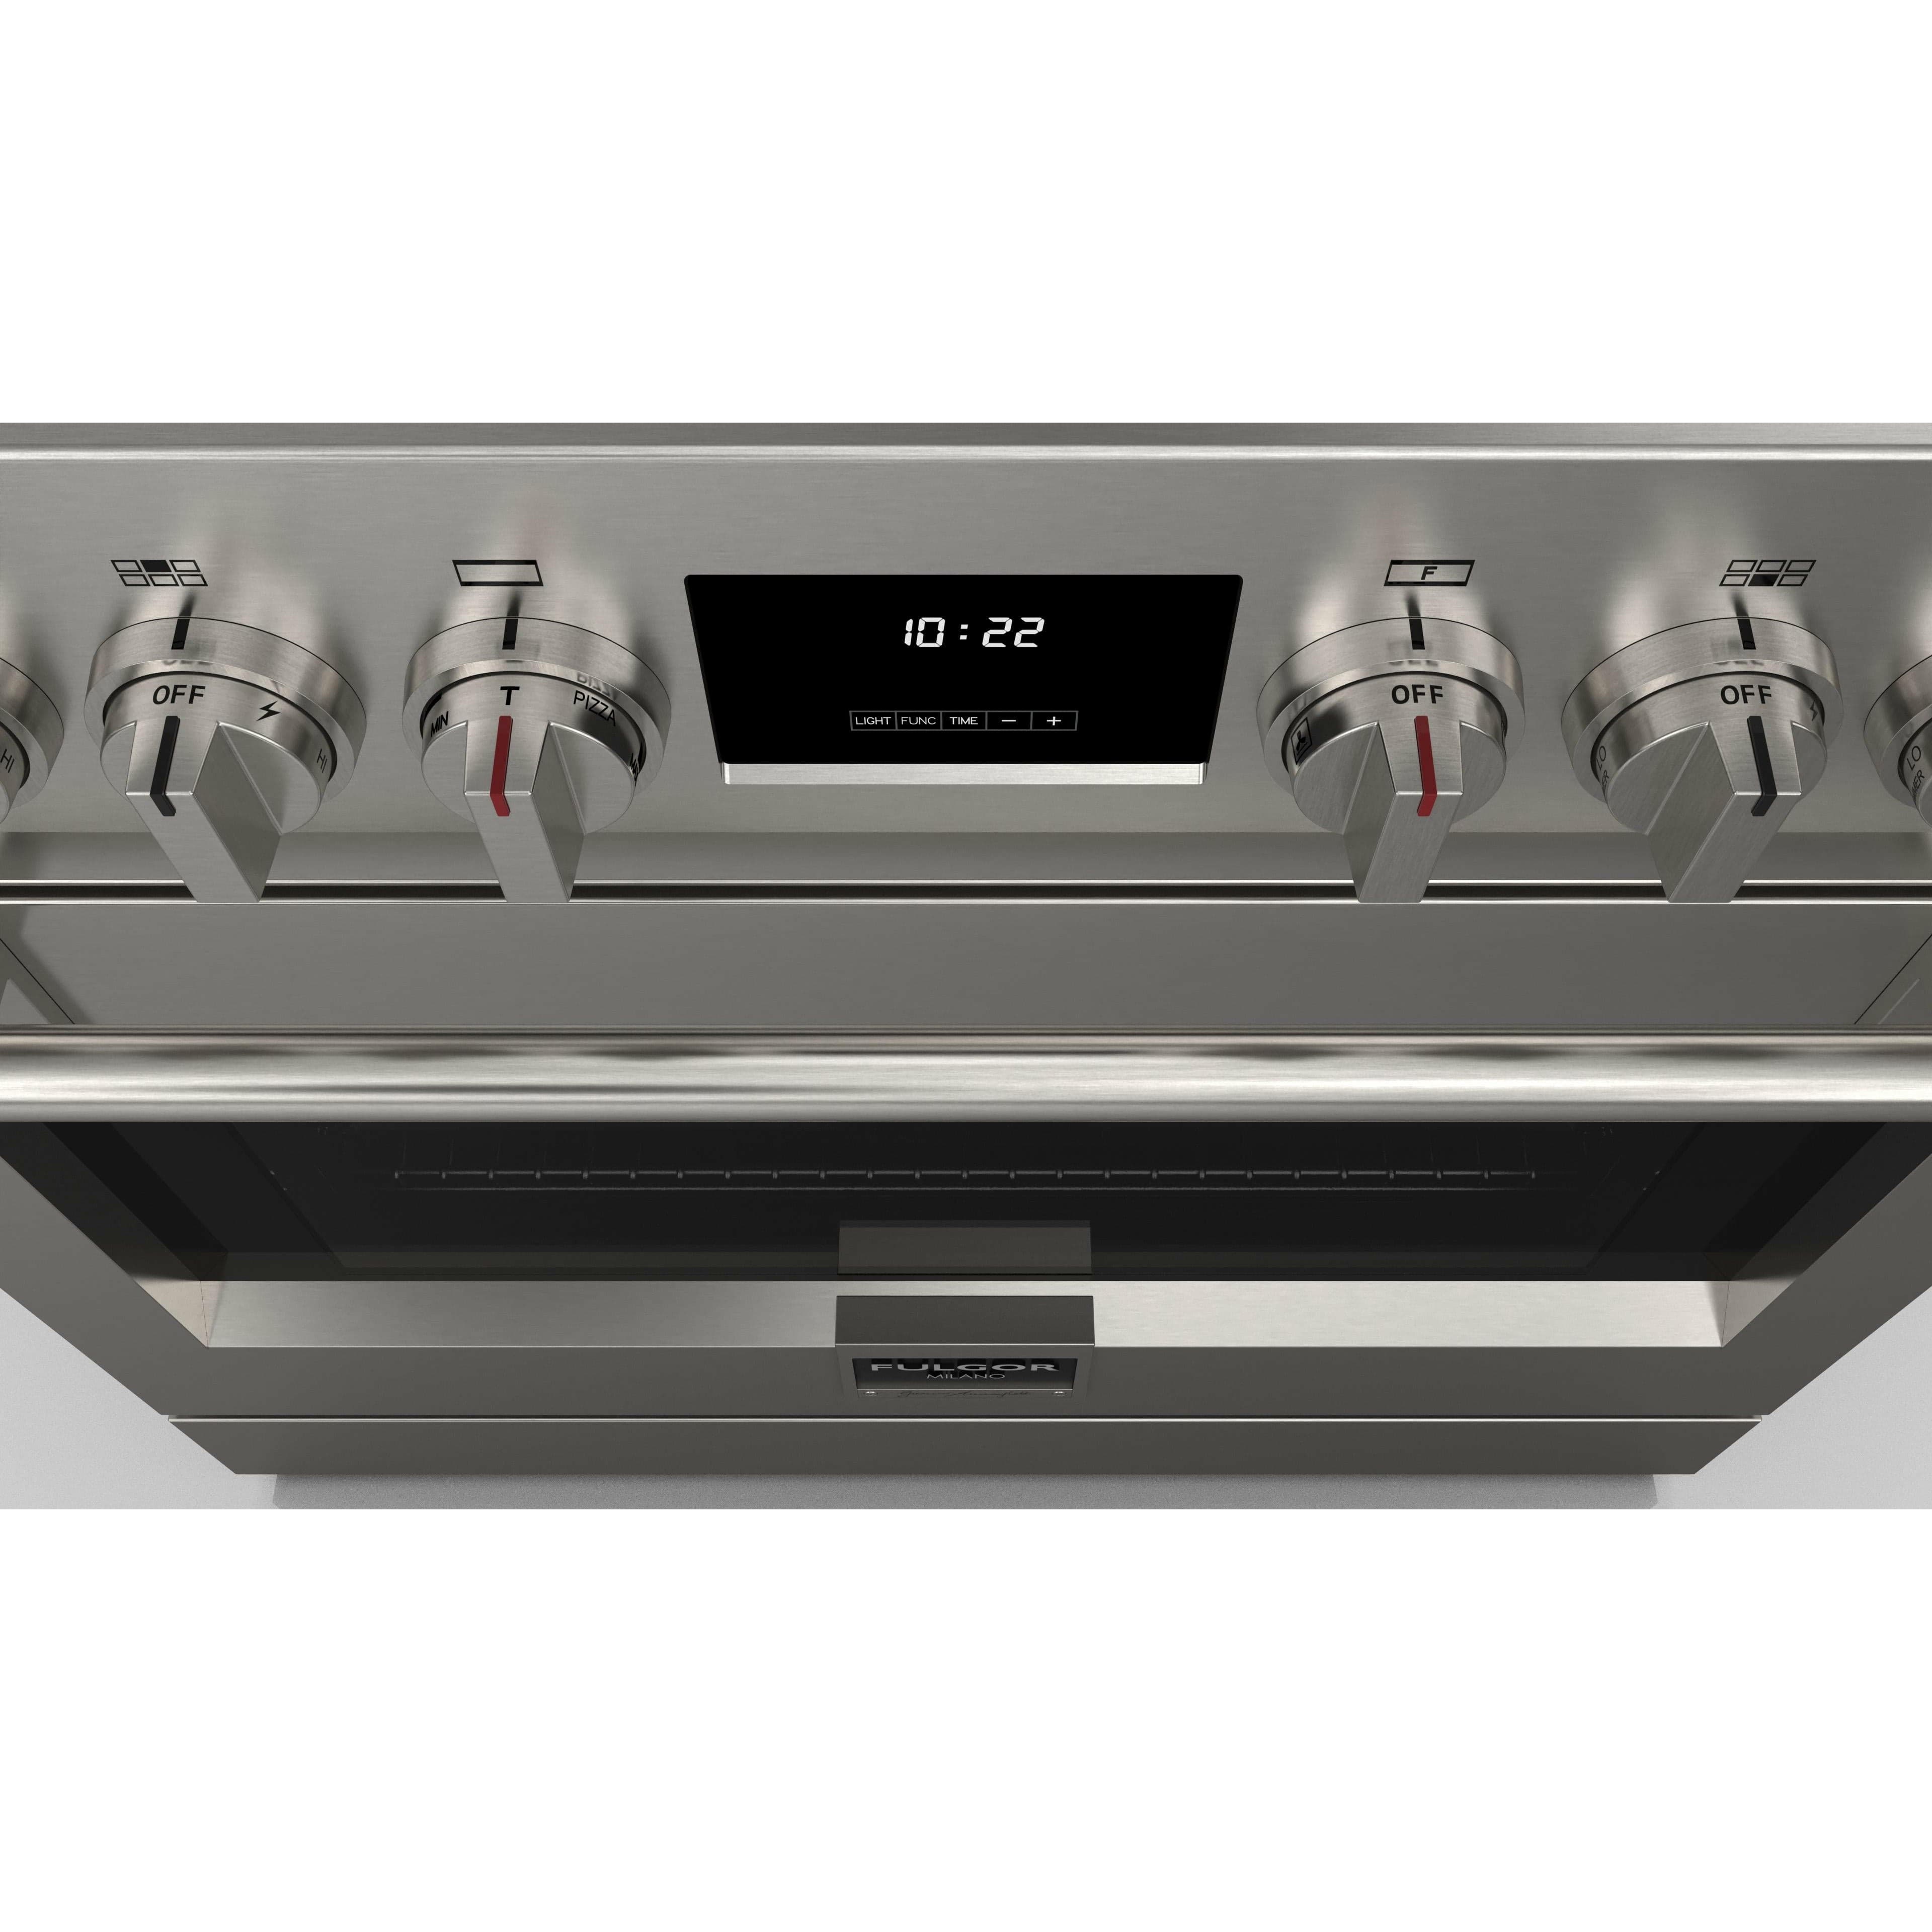 Fulgor Milano 36" Professional Gas Range with 6 Dual-Flame Burners, 5.7 cu. ft. Capacity, Stainless Steel - F6PGR366S2 Ranges Luxury Appliances Direct